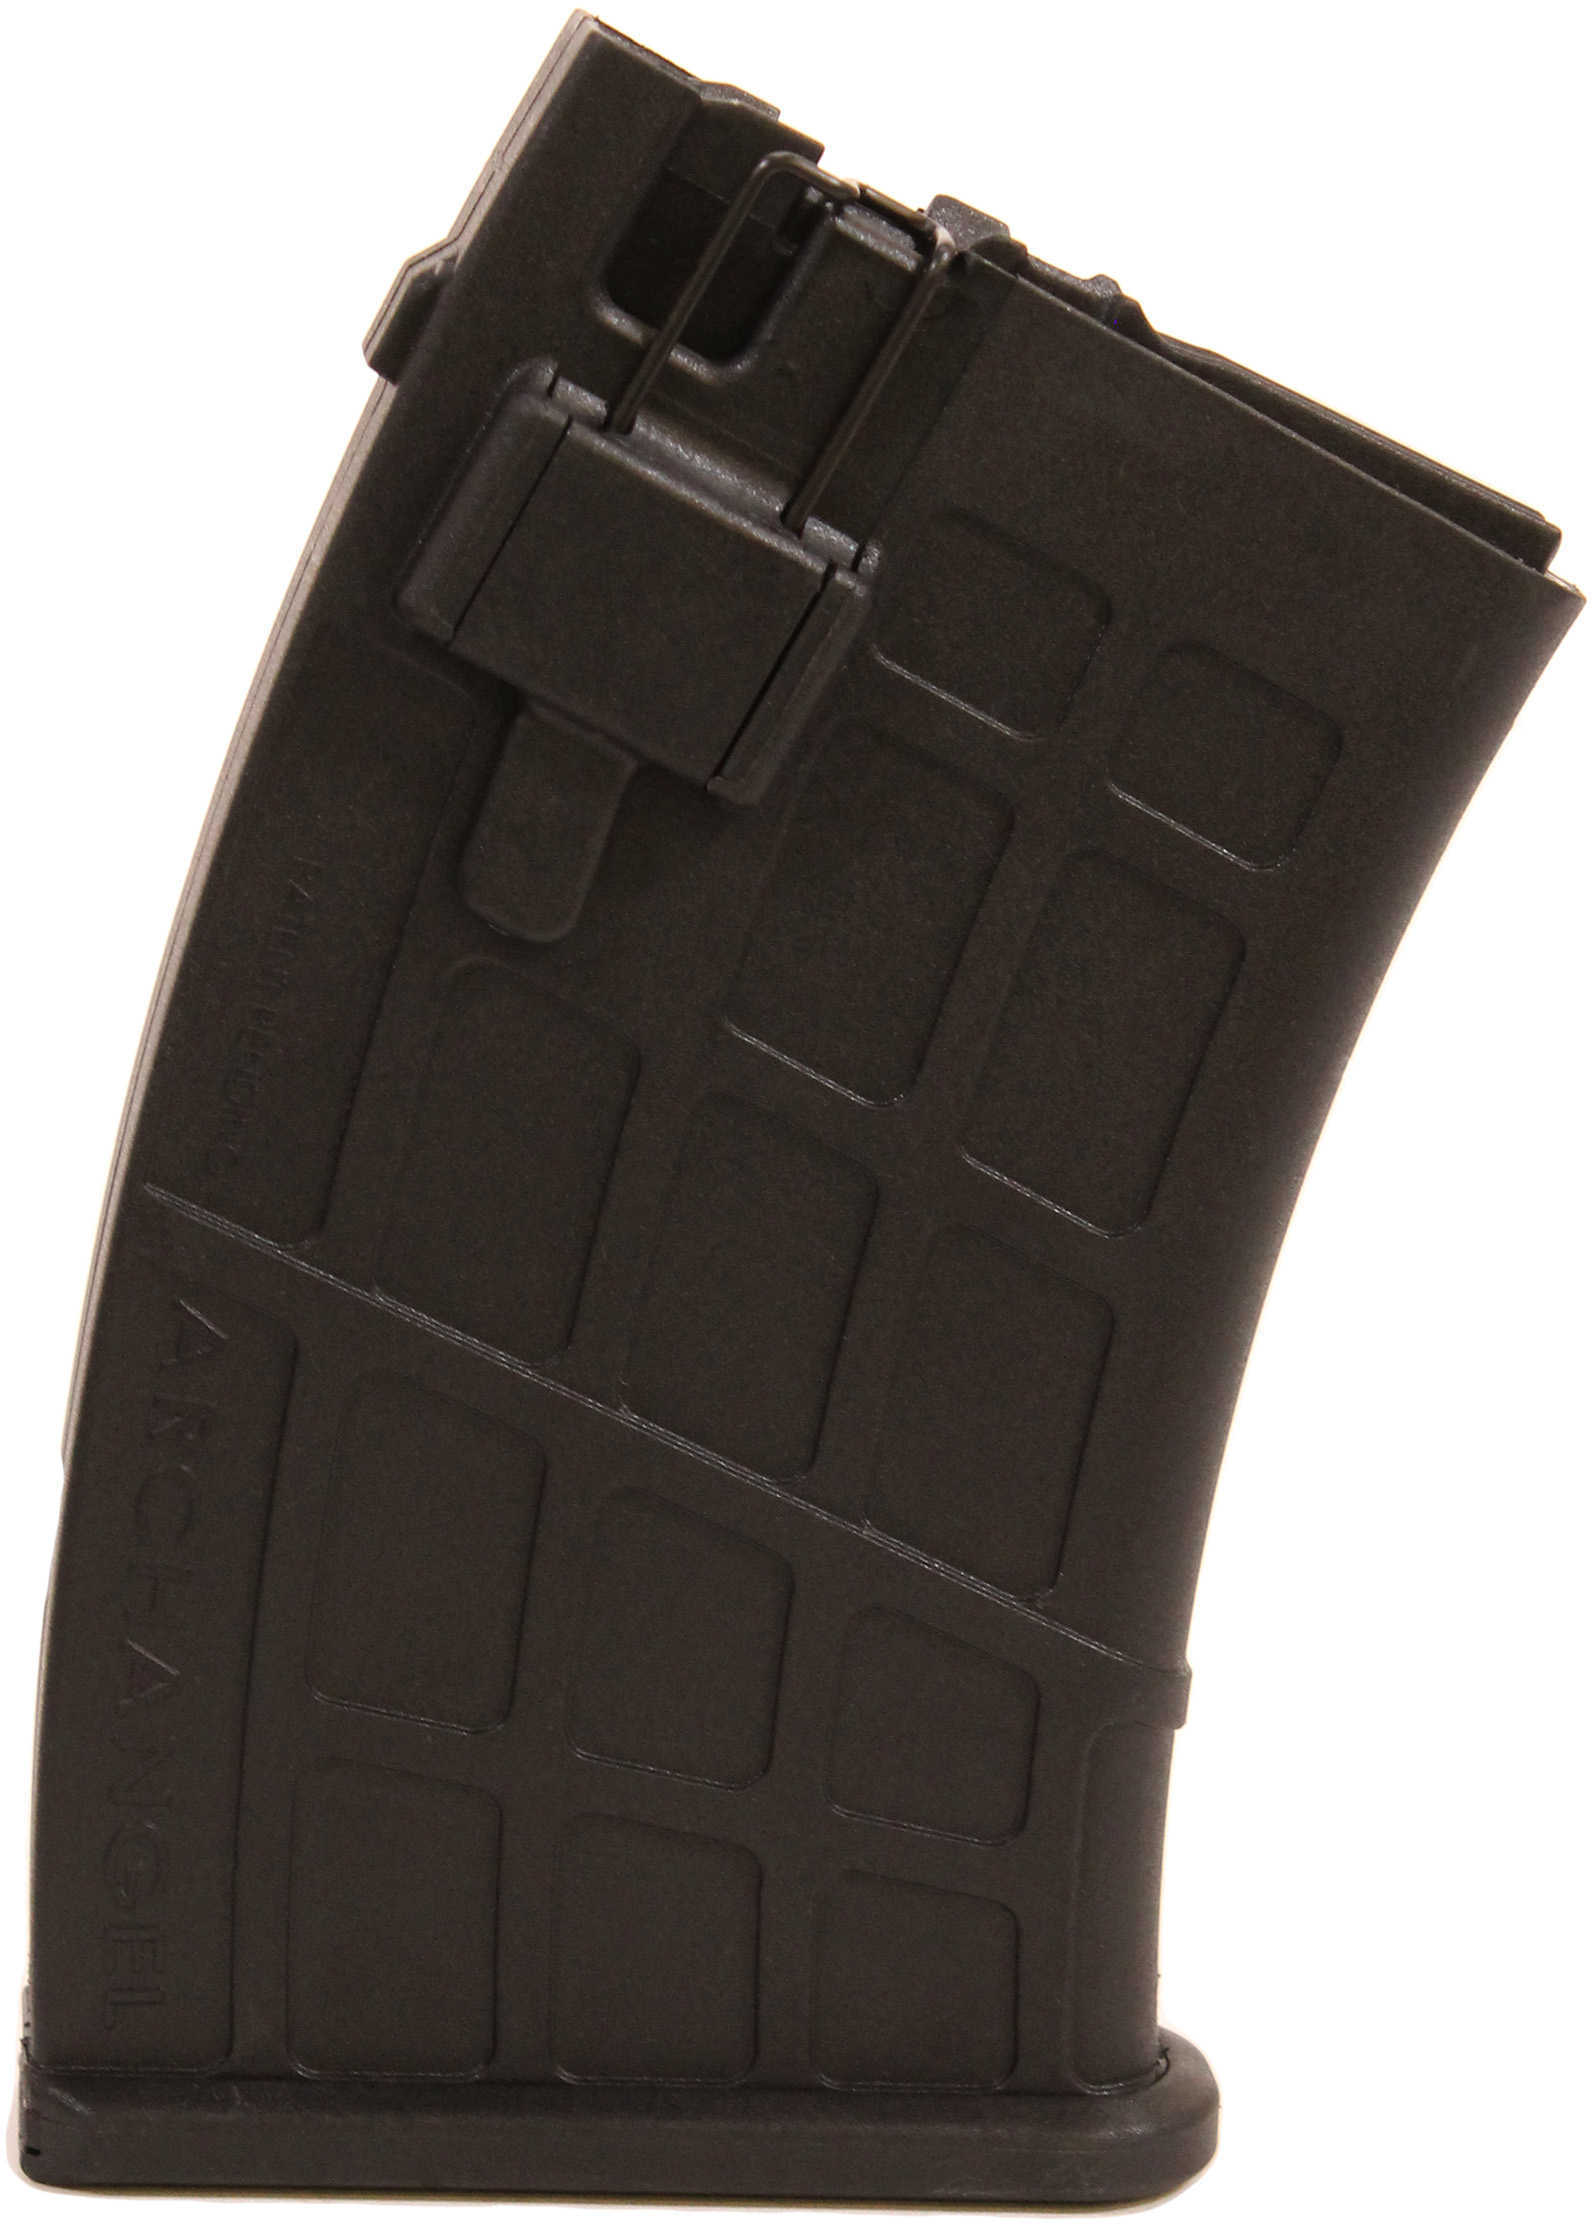 Promag Archangel Mag For 7.62X54R AA9130 Blk 10Rd